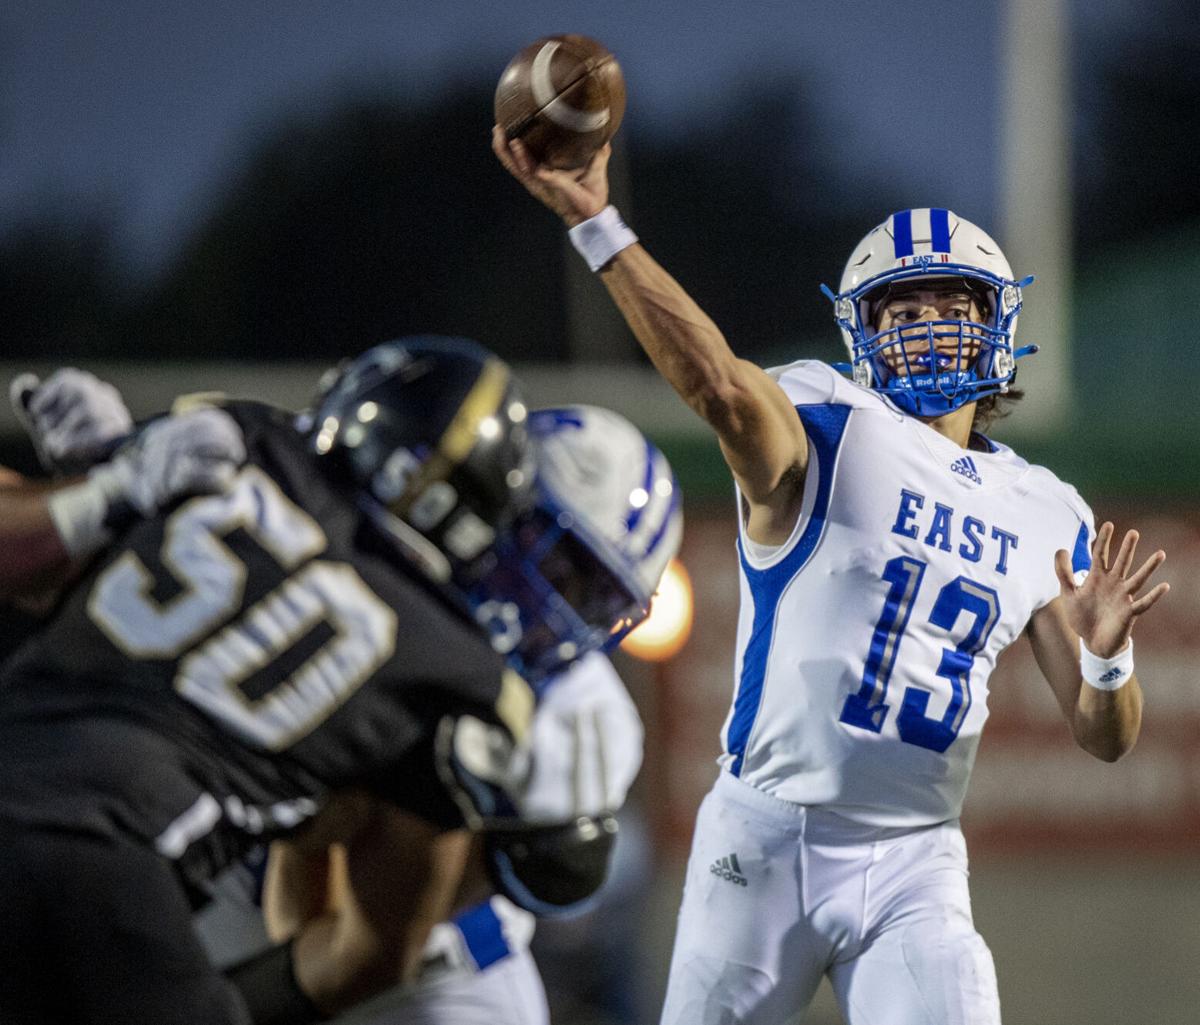 Lincoln East vs. Lincoln Southeast, 9.23